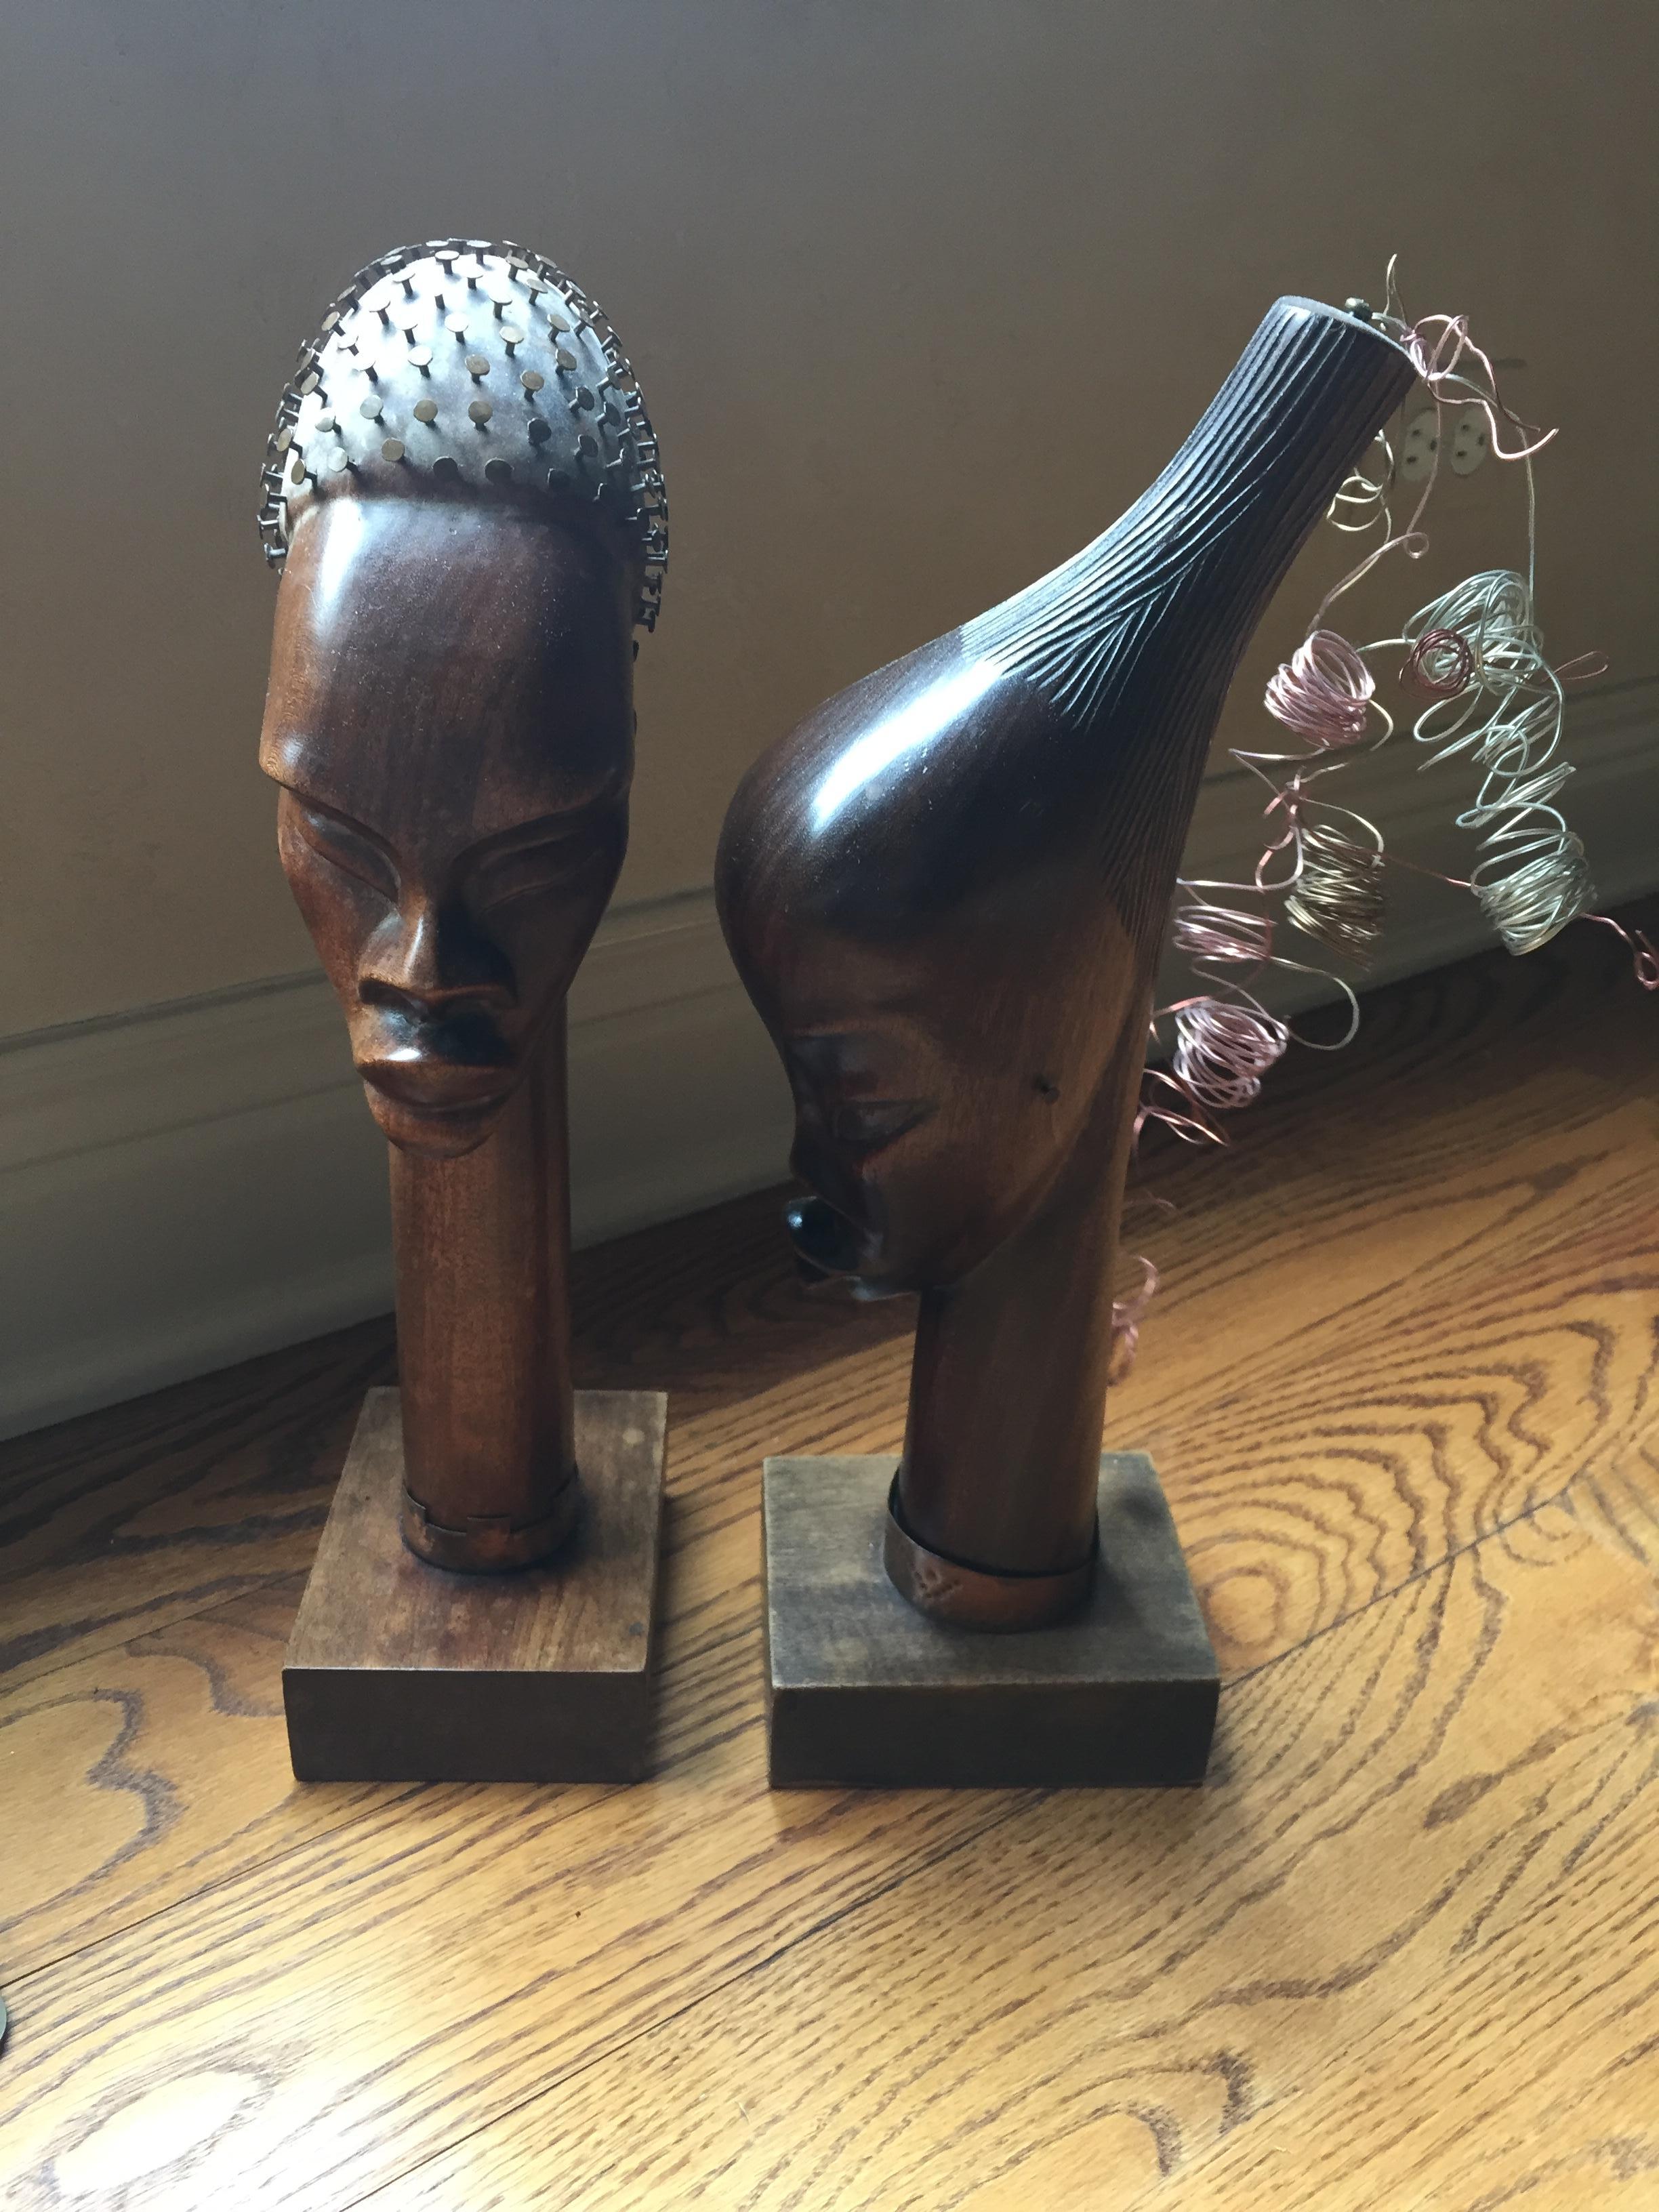 Folk Art  Primitive Hand carved wood busts/ a pair
A trip to Haiti in 1950 opened the world to our grandparents.
A pair of detailed, carved wood busts offer incredible detail-
the nail head ears, studded skull, copper curls, bronze cuffs-
solid and